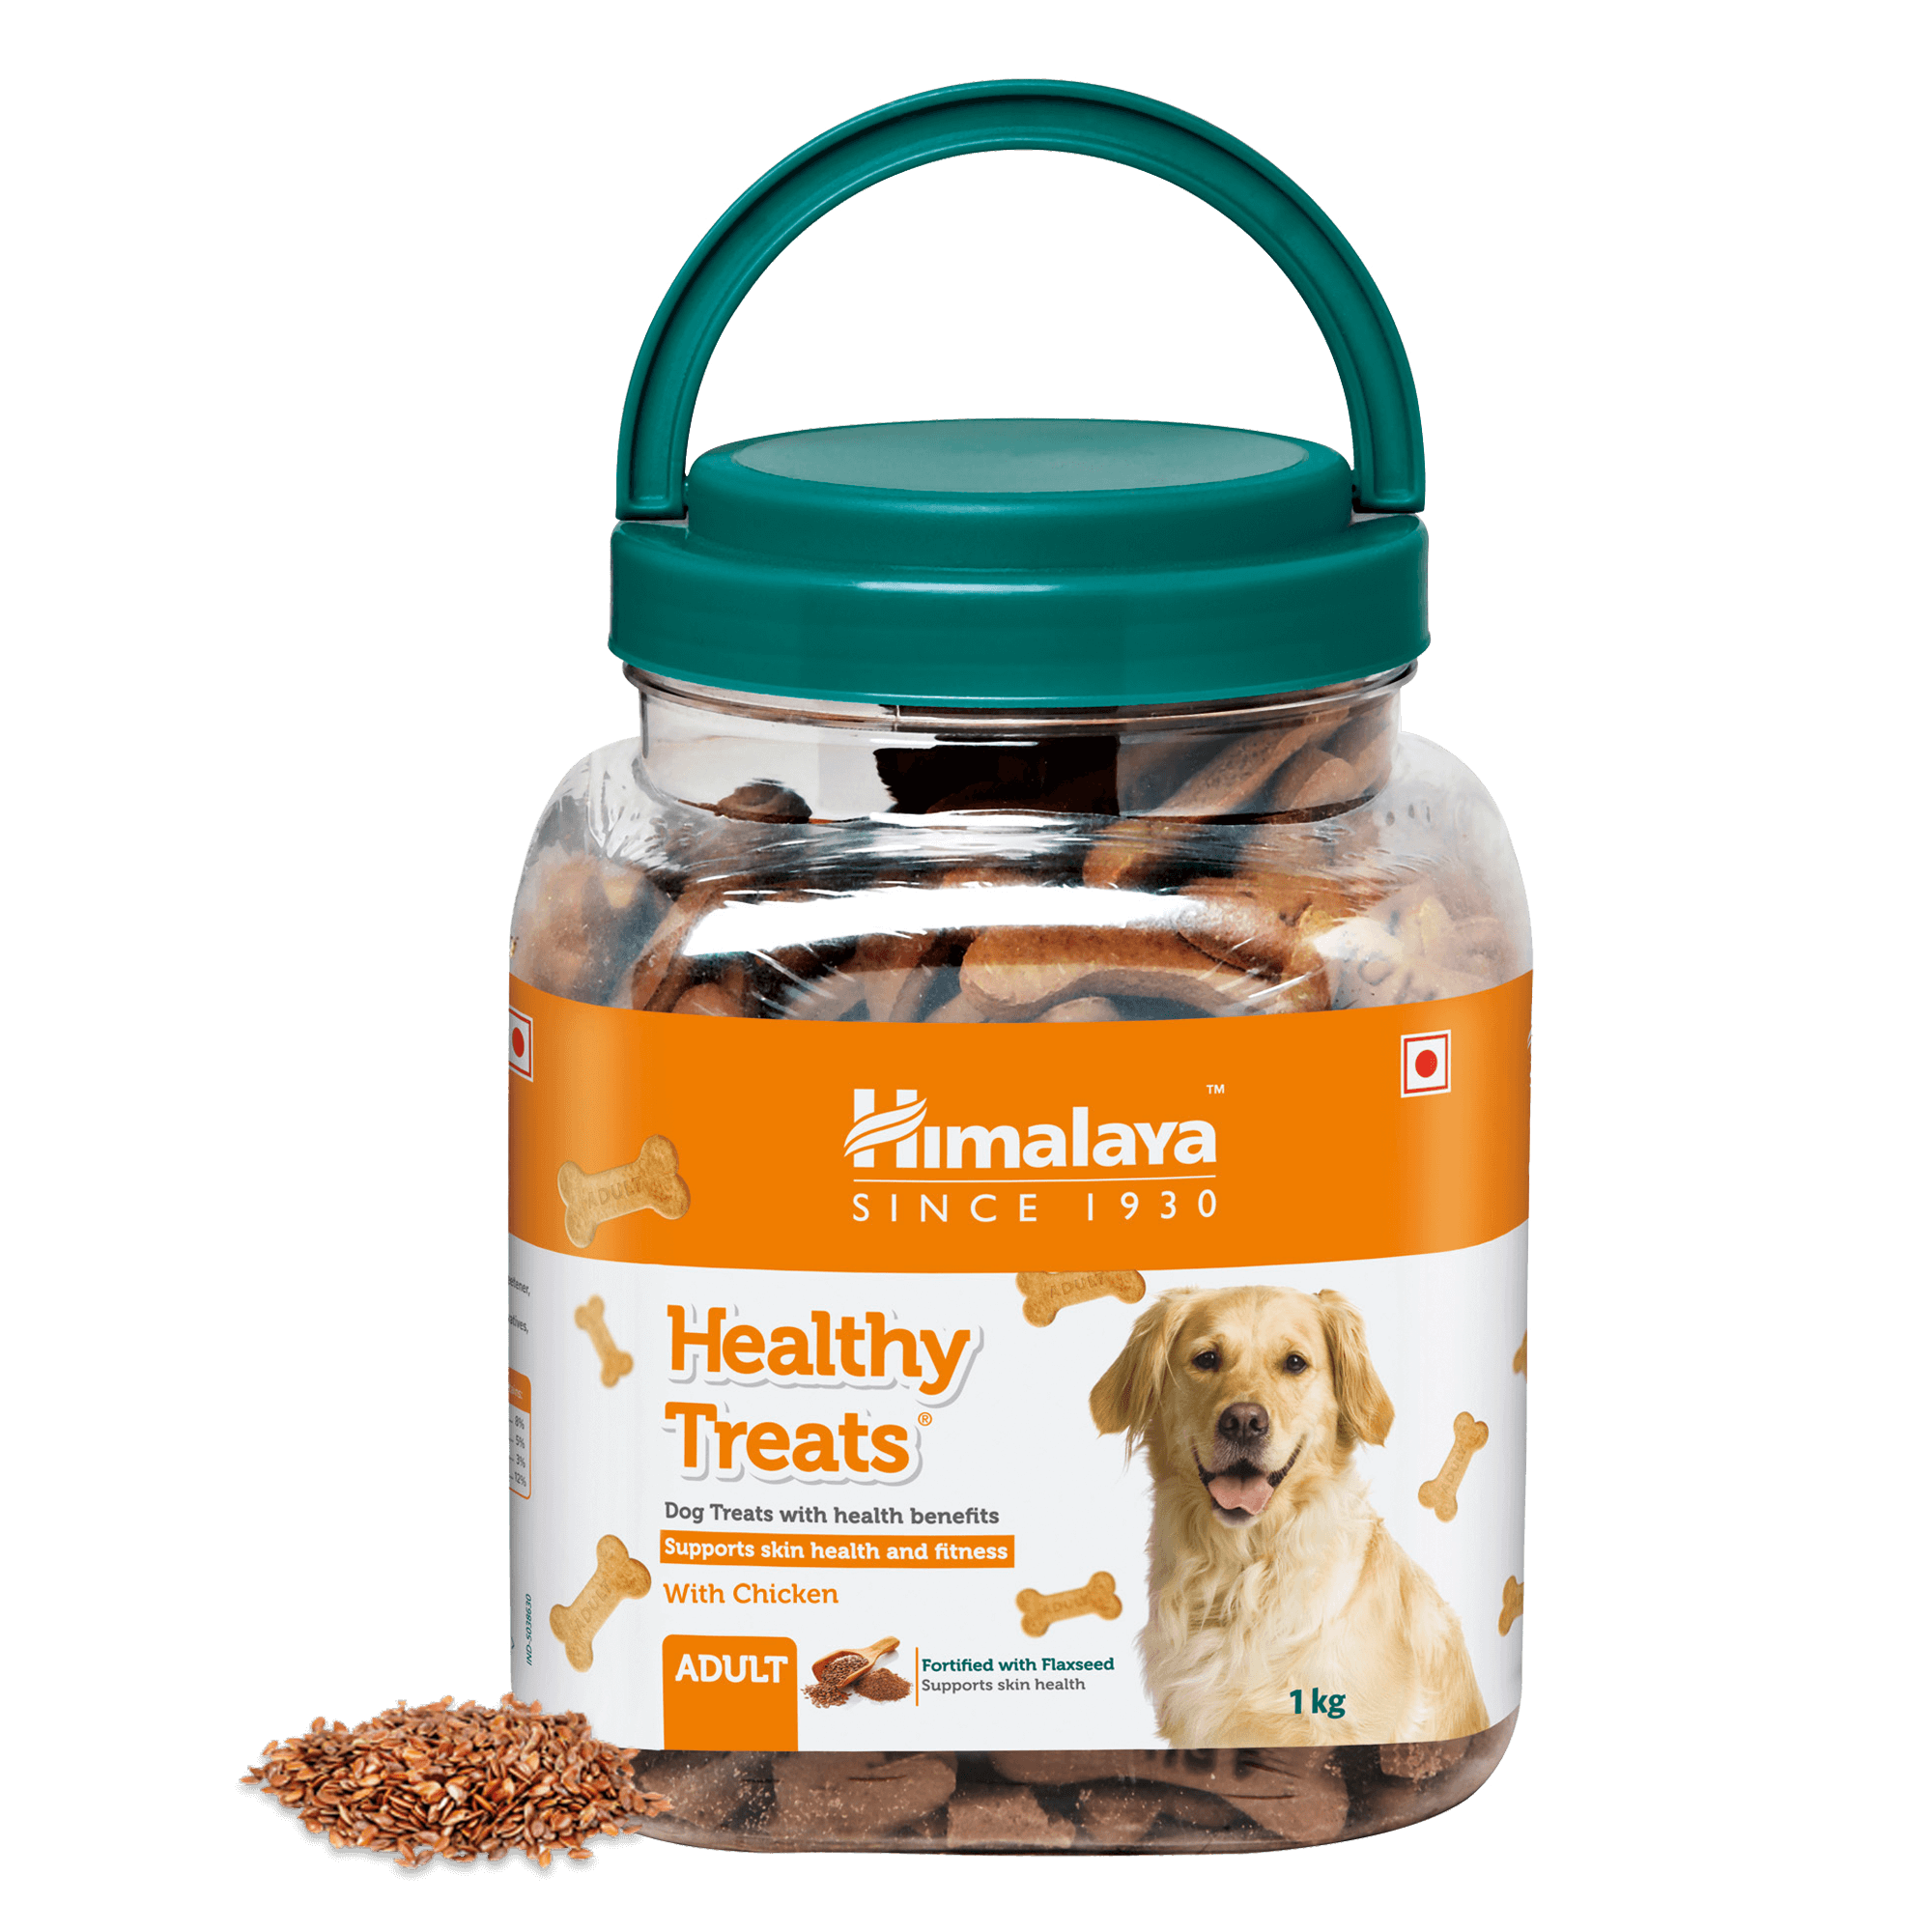 Himalaya Healthy Treats (Adult) - Promotes Overall Fitness in Dogs